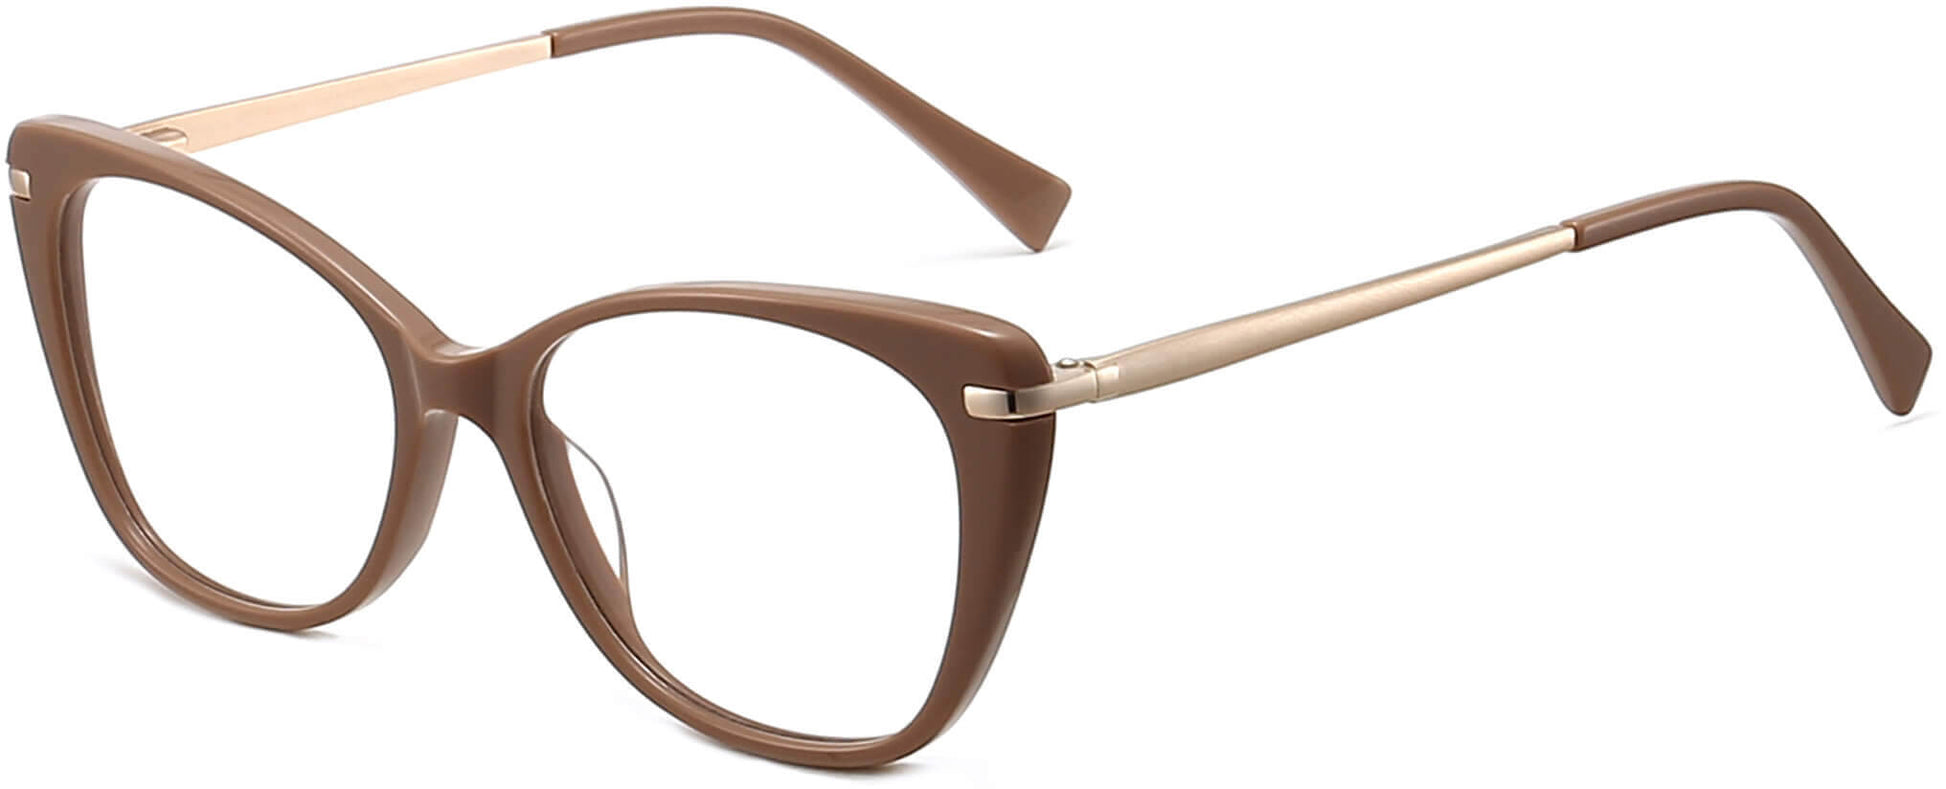 Celine Cateye Brown Eyeglasses from ANRRI, angle view